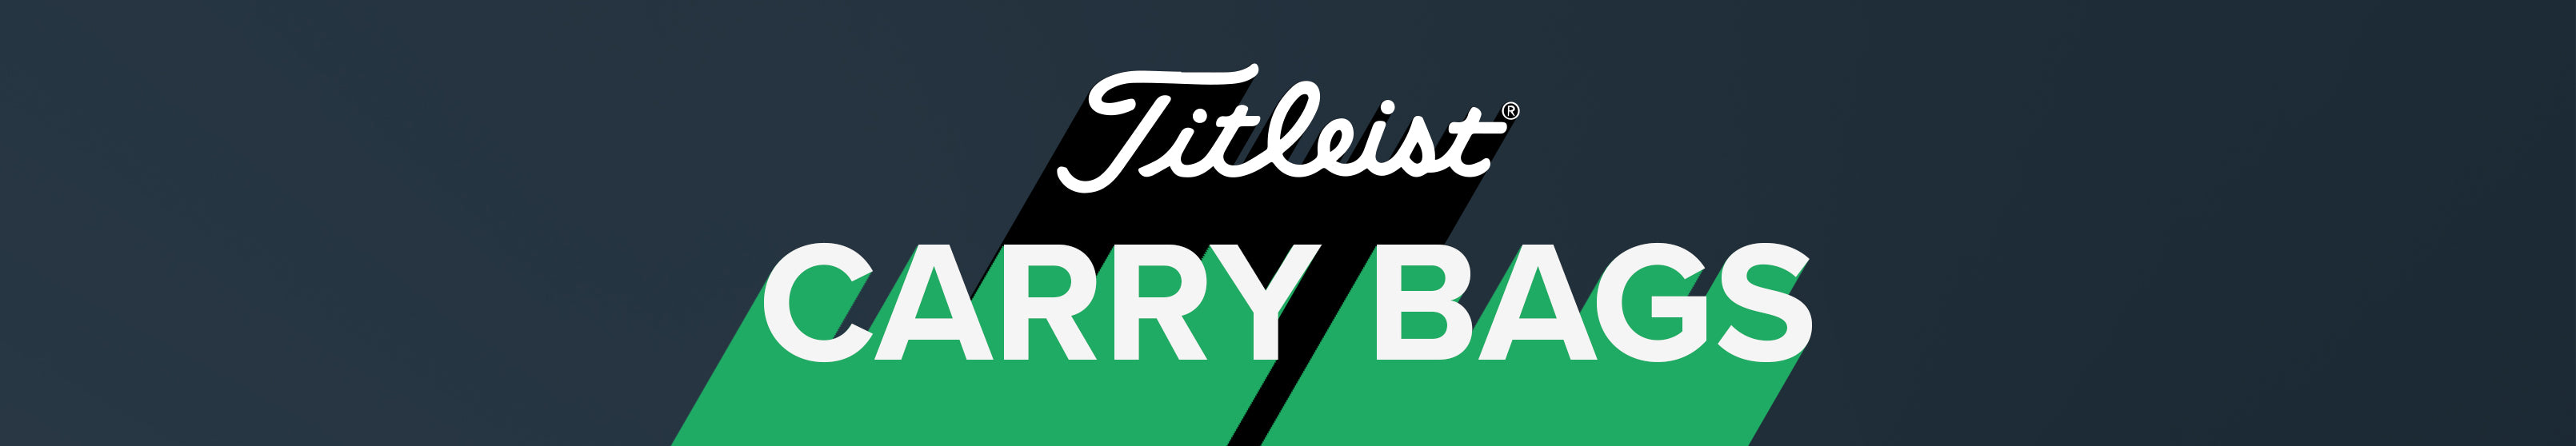 Titleist Carry Bags